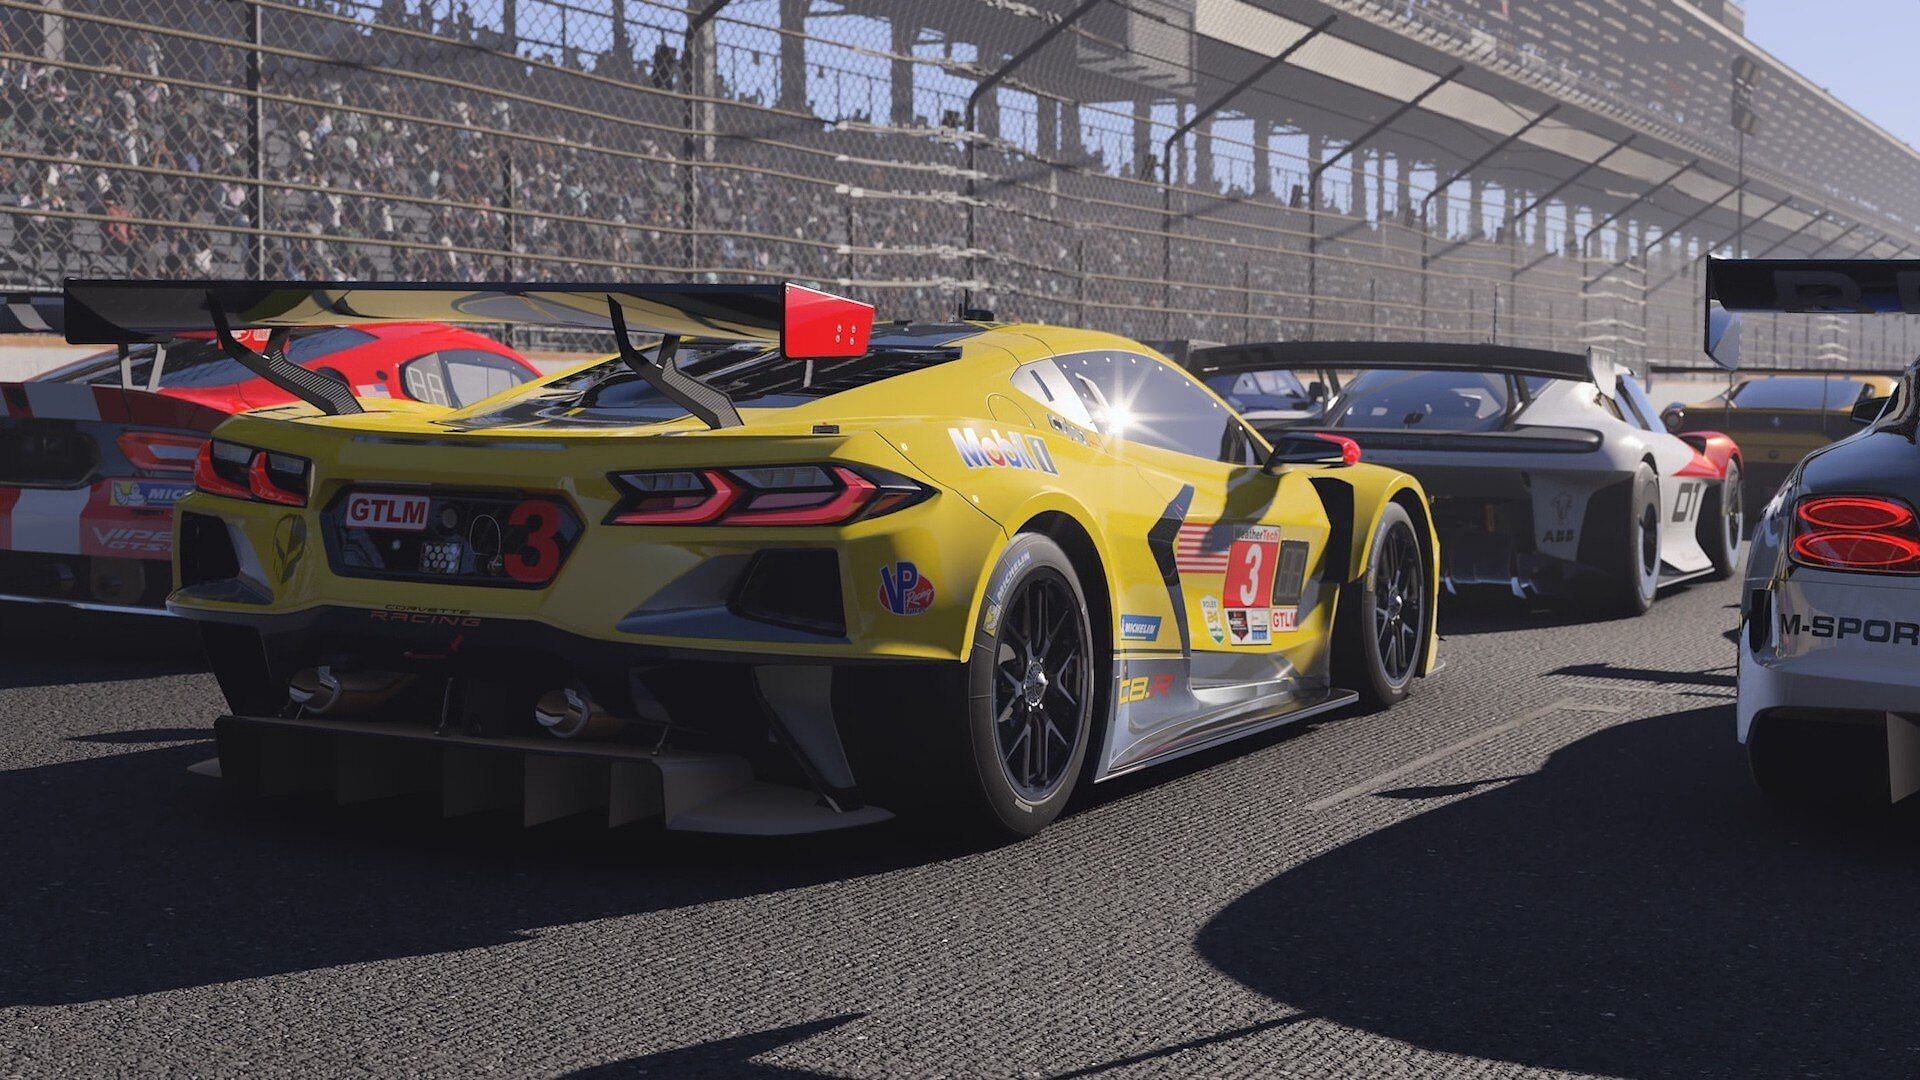 Starting a race in a Corvette, in the game Forza Motorsport.